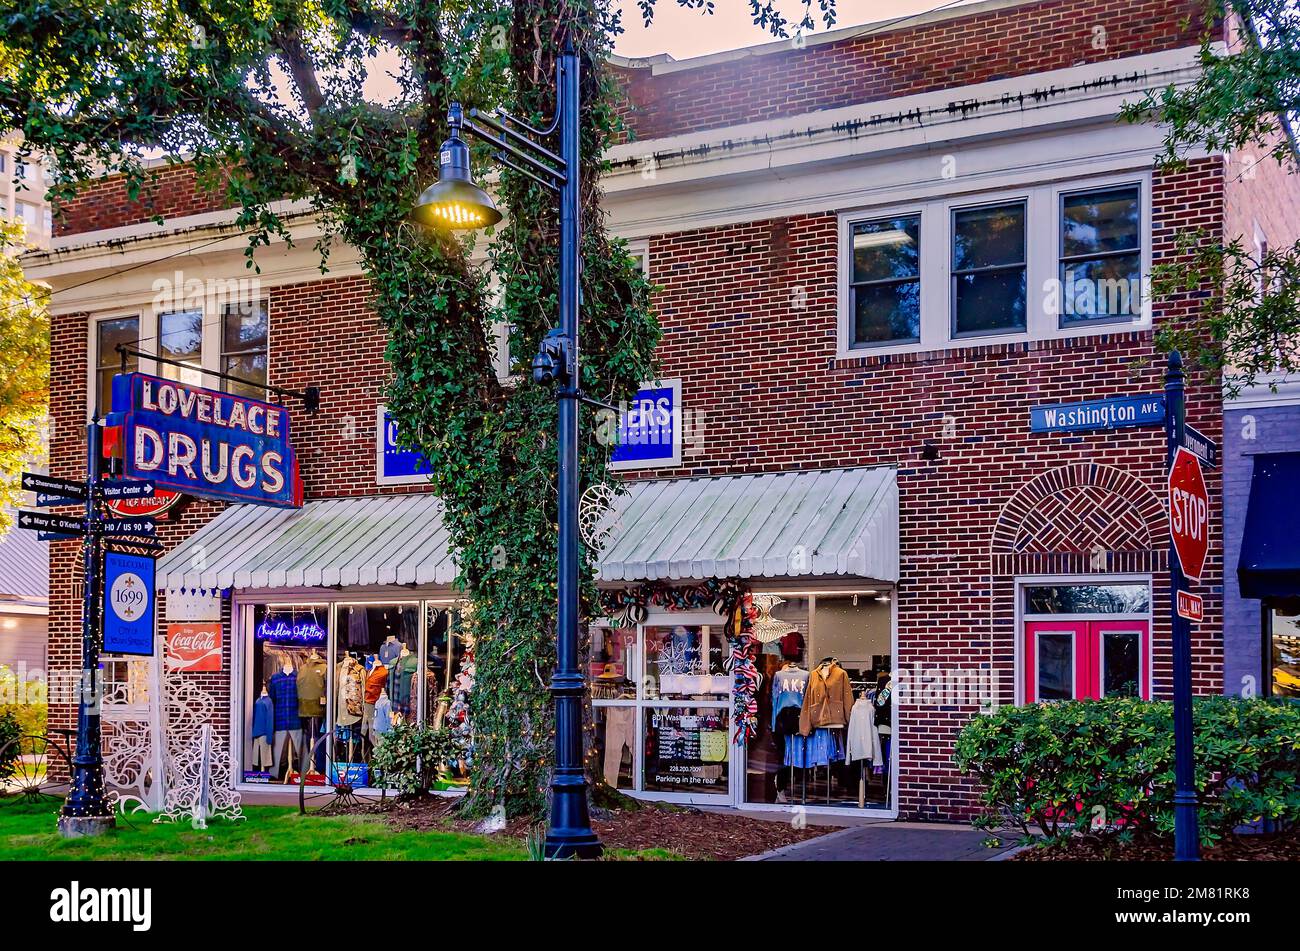 Lovelace Drugs is pictured, Dec. 28, 2022, in Ocean Springs, Mississippi. The pharmacy, originally known as Ocean Springs Drugs, was built in 1926. Stock Photo